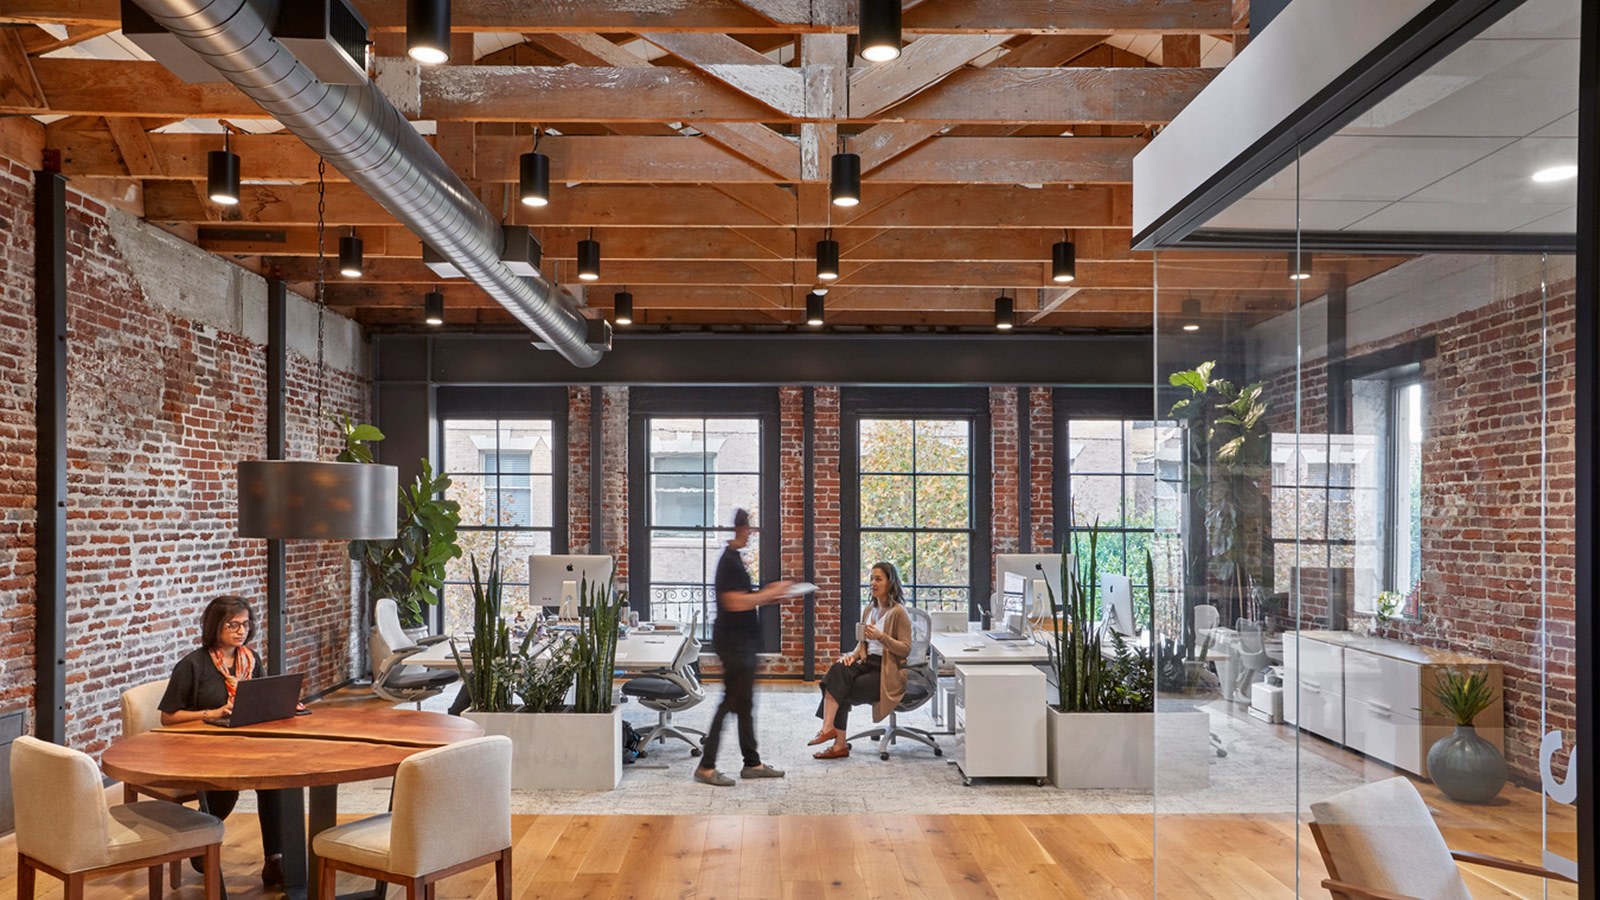 The brick-walled workspace of 01 Advisors